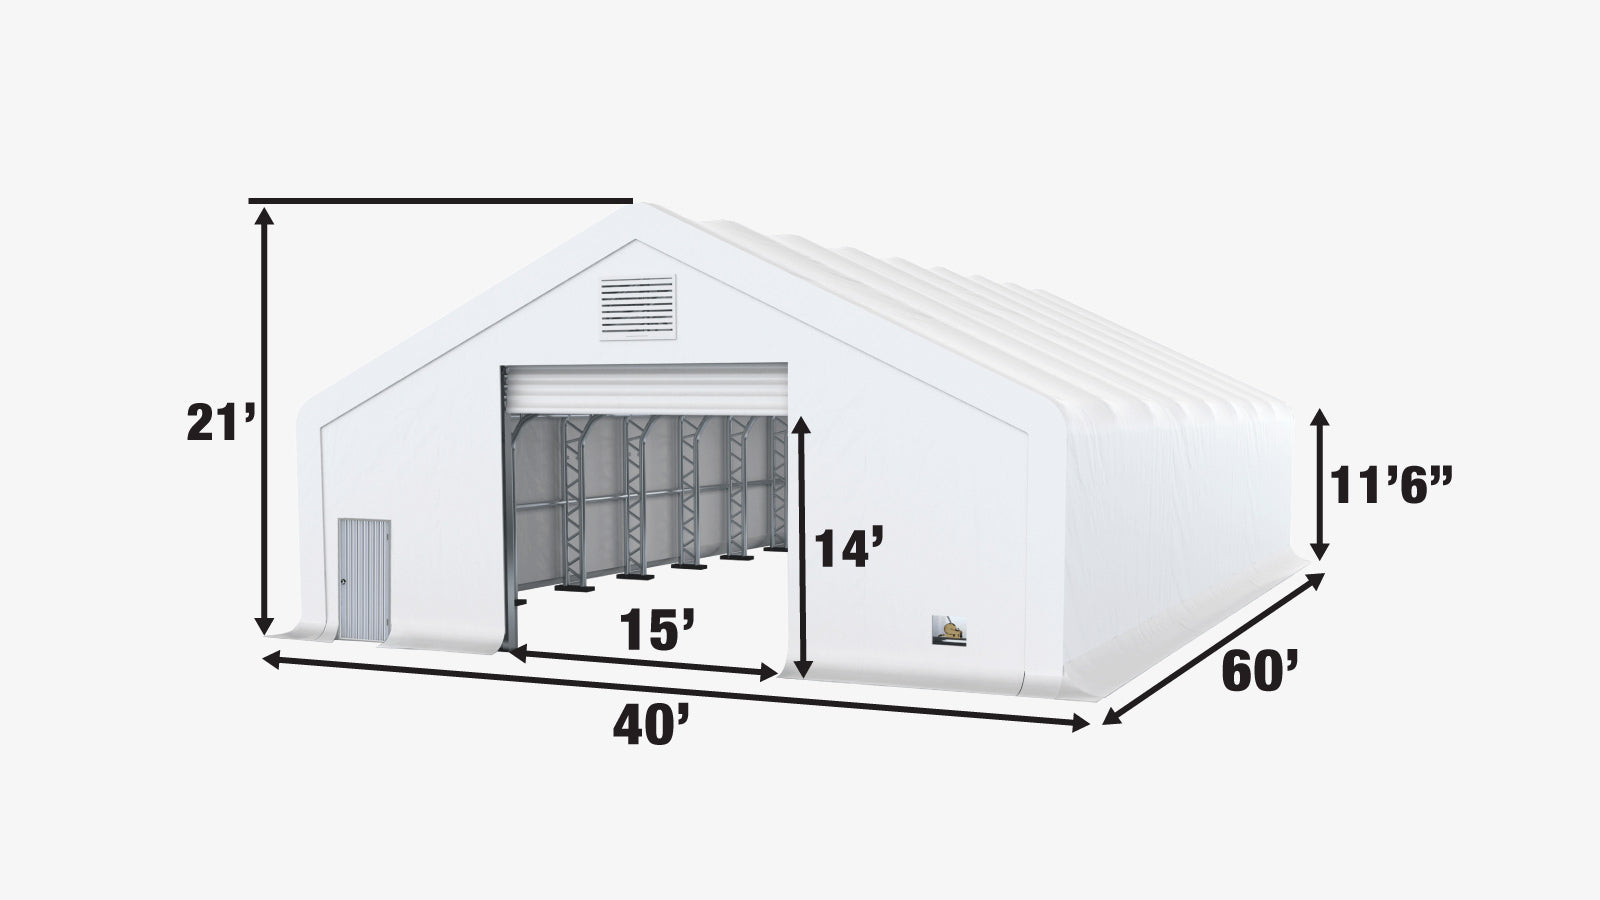 <tc>TMG Industrial Pro Series 40' x 60' Dual Truss Storage Shelter with Heavy Duty 21 oz PVC Cover & Drive Through Doors, TMG-DT4063-PRO (anciennement TMG-DT4060-PRO)</tc>-specifications-image